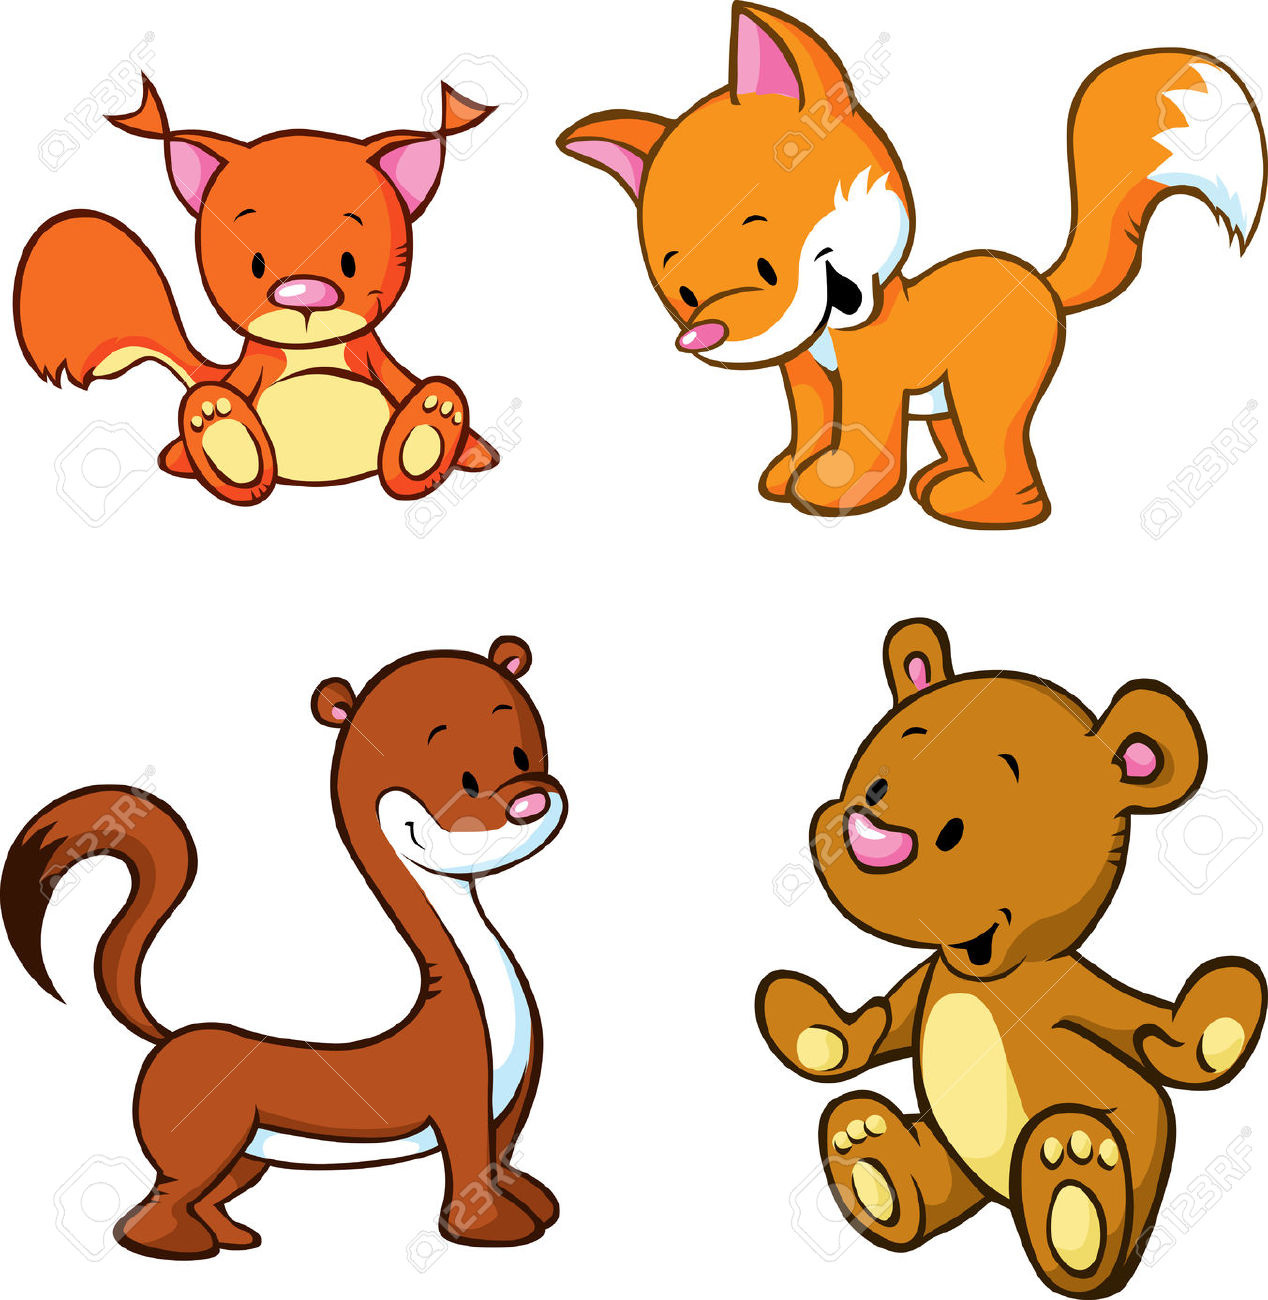 Weasel clipart #2, Download drawings